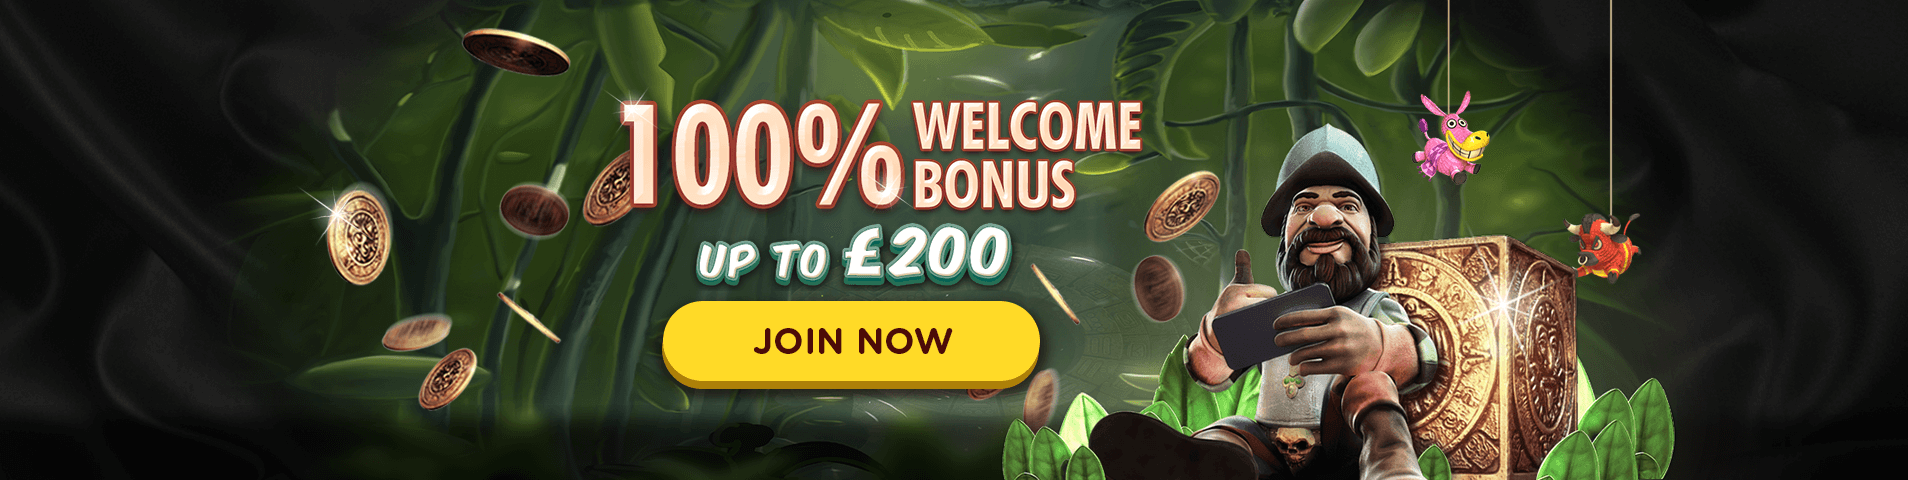 Roulette Payouts Welcome Bonus